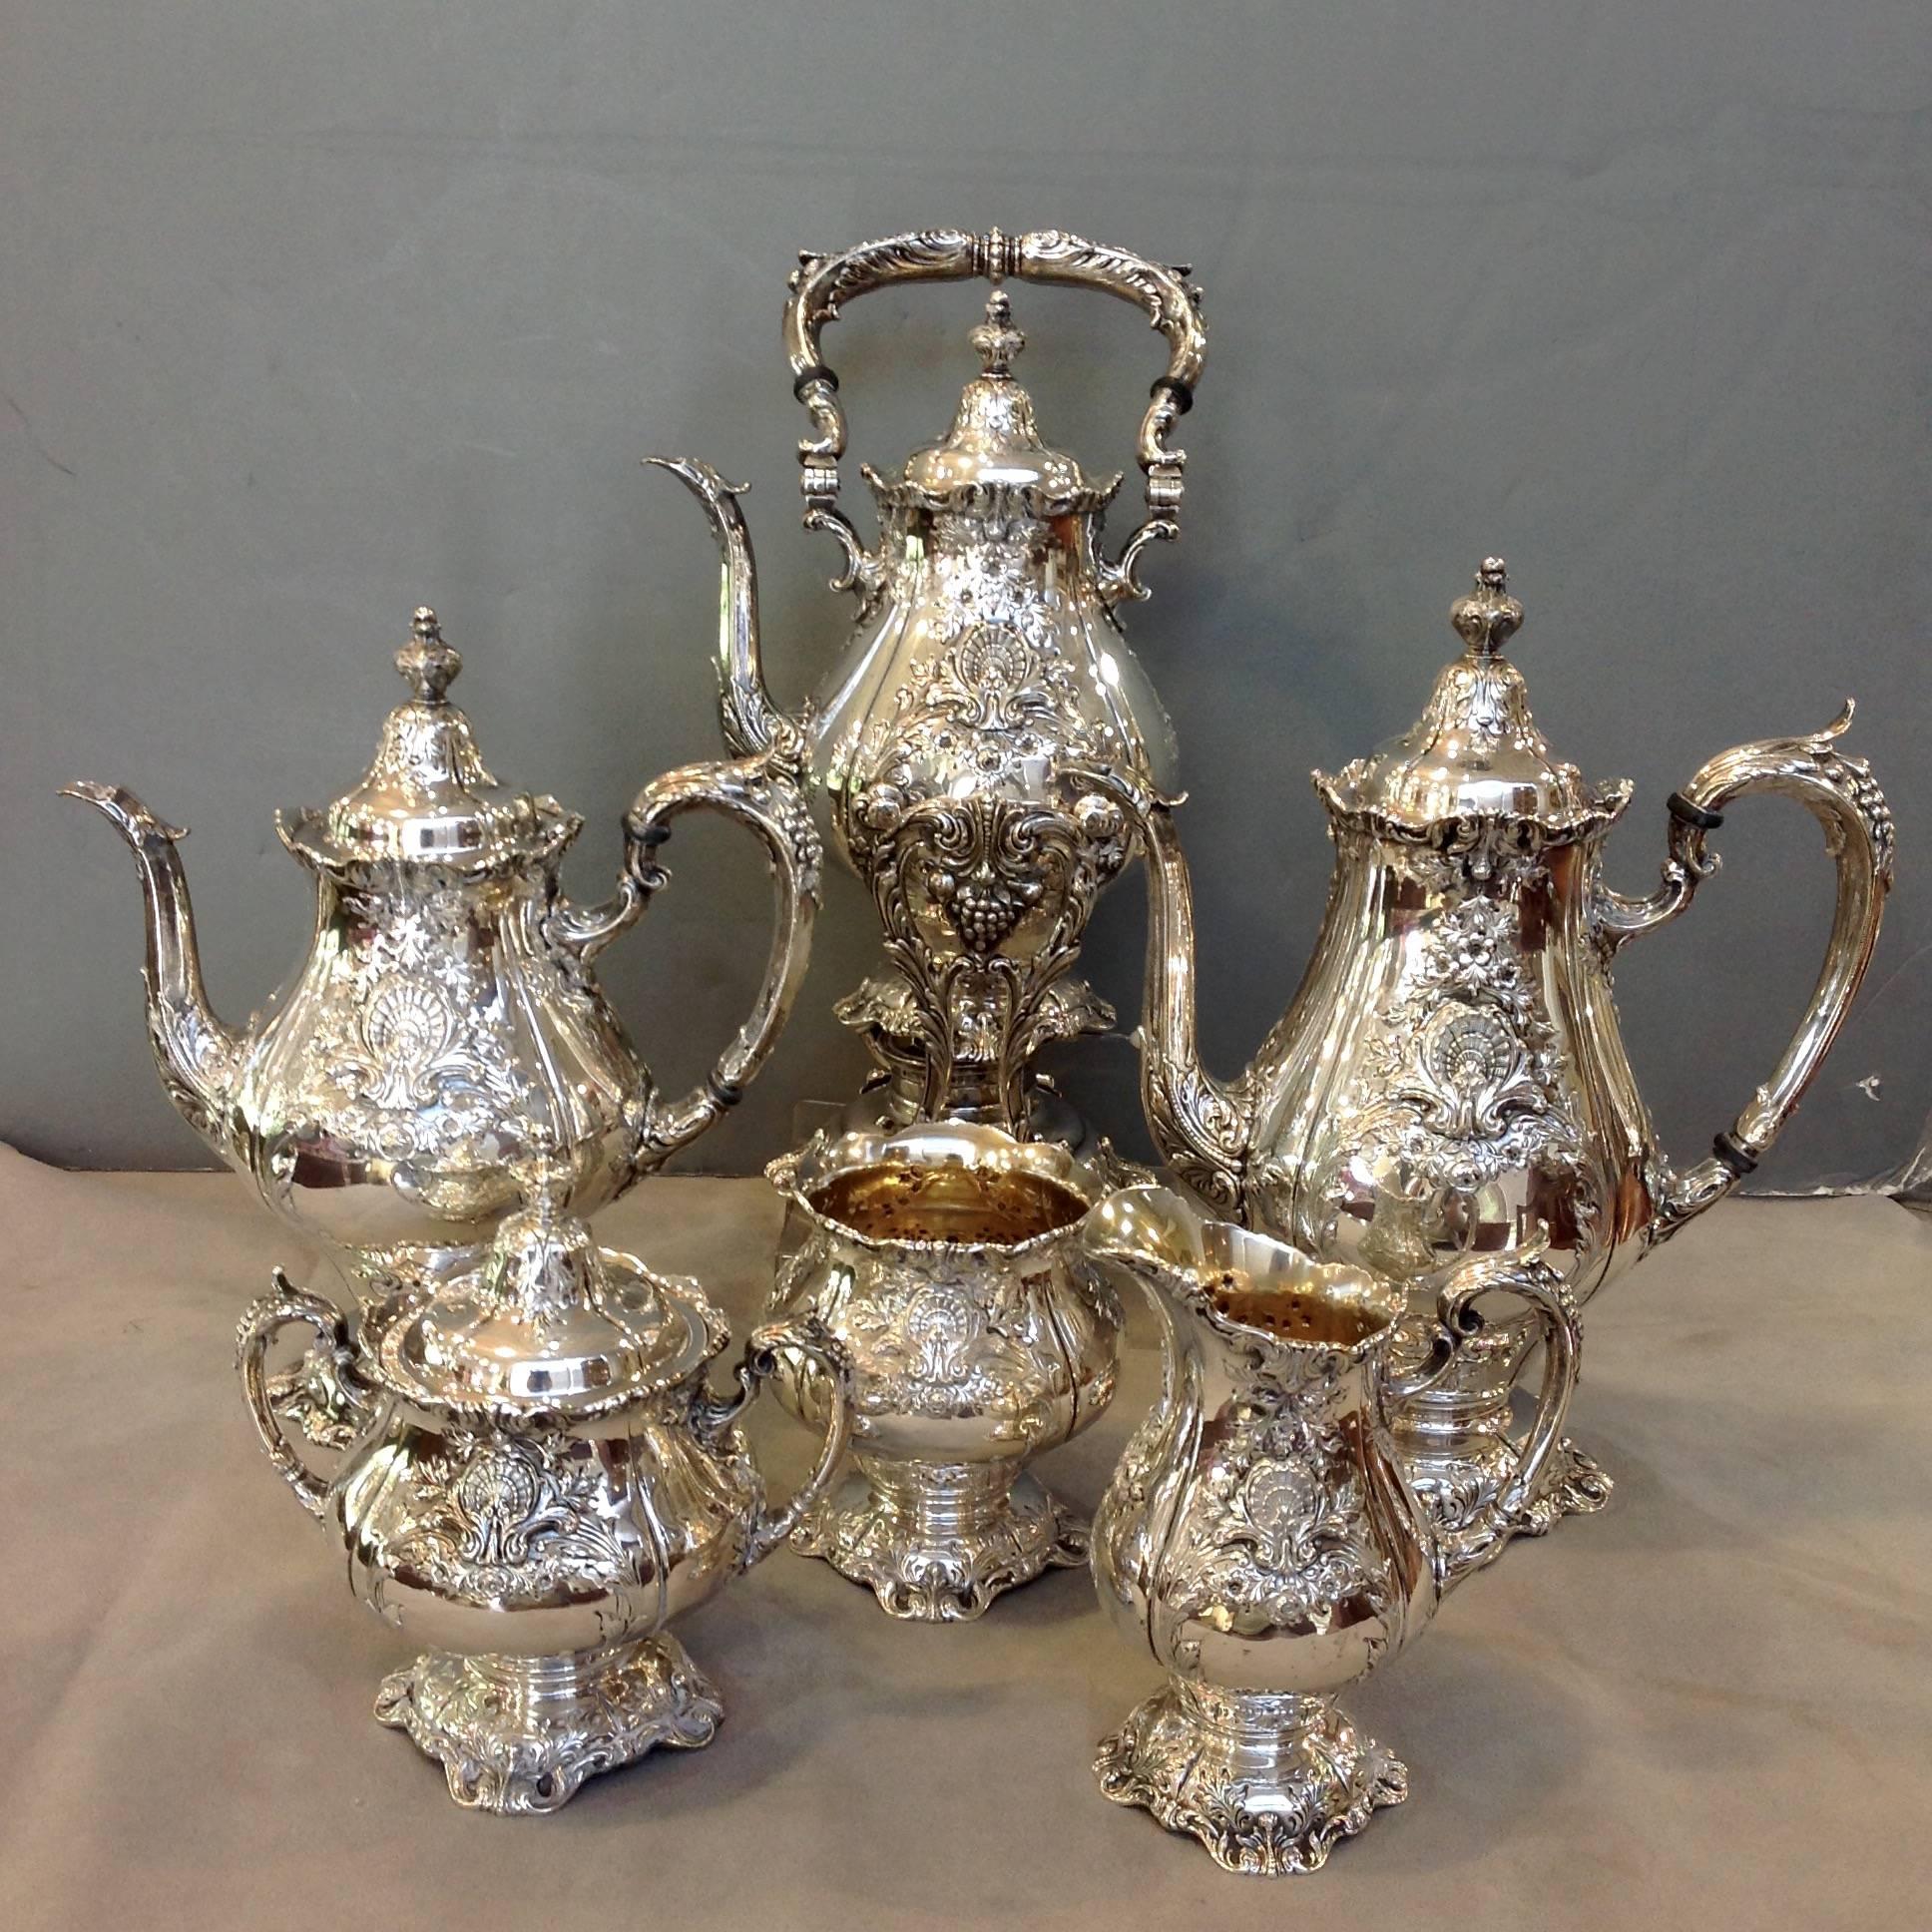 Sir Christopher six-piece sterling tea set including a kettle on stand and a large two handled oval tray. It is monogrammed G. This beautiful set is hand chased and quite heavy. It was made by Wallace in the 1960s.